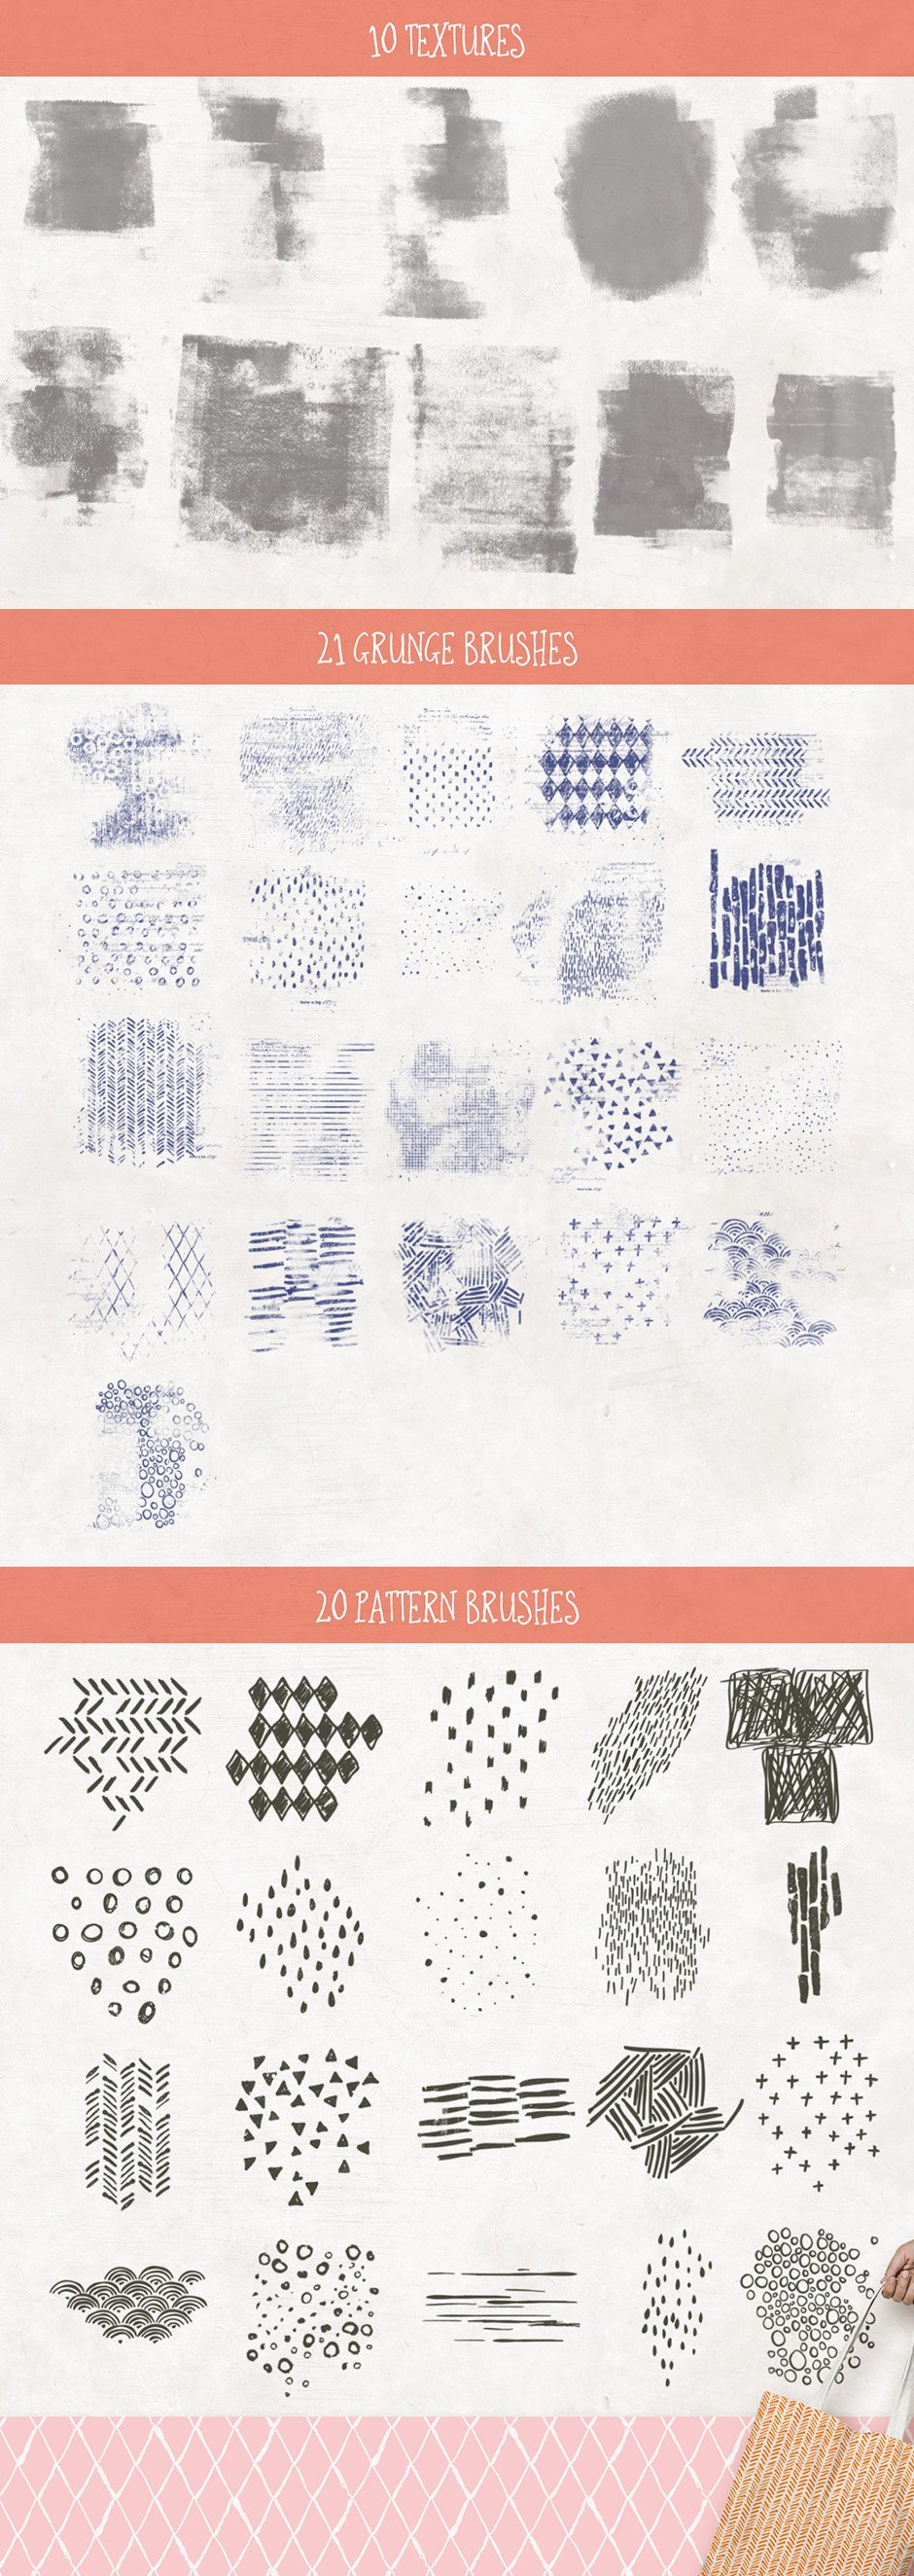 Handmade Patterns and Textures